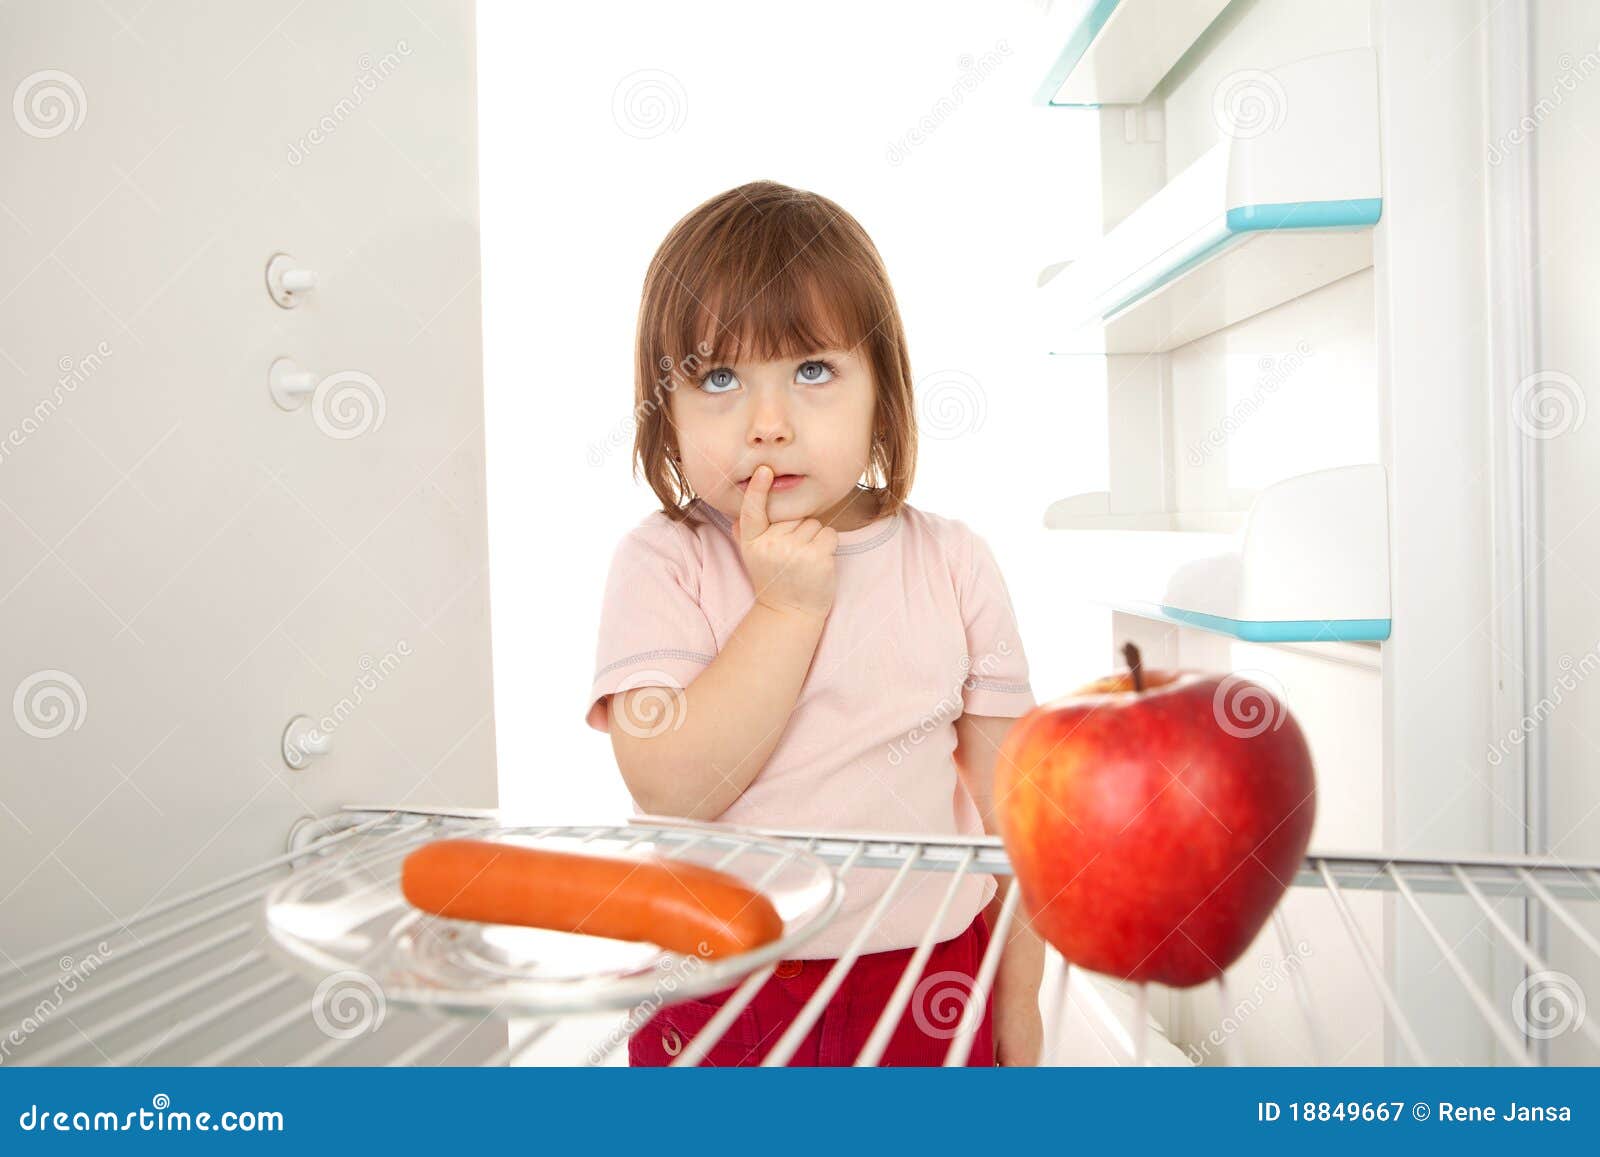 Healthy eating choice. Cute young girl looking in open refrigerator deciding between healthy apple and unhealthy hot dog.